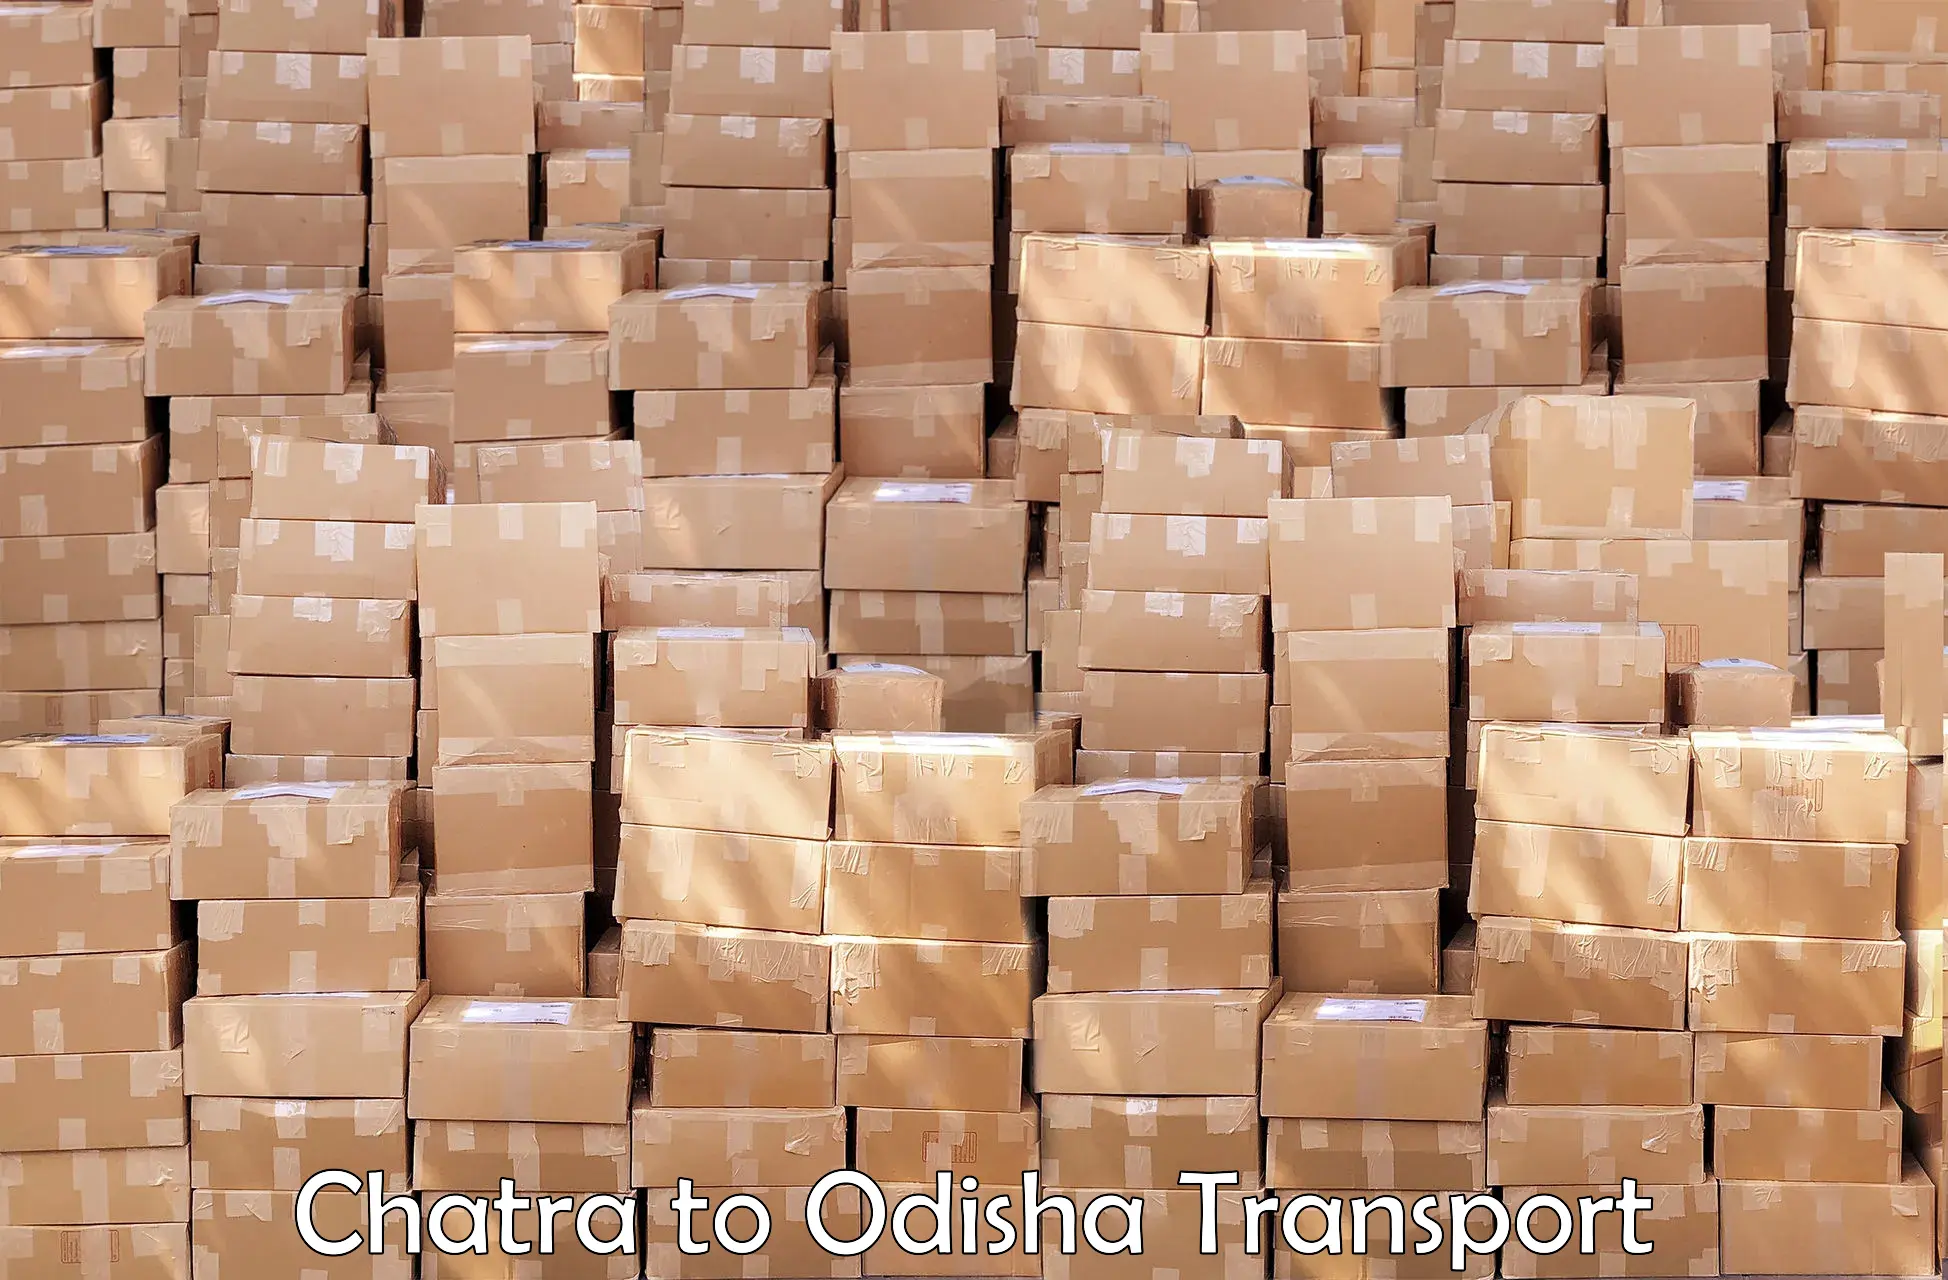 Transport bike from one state to another Chatra to Odisha